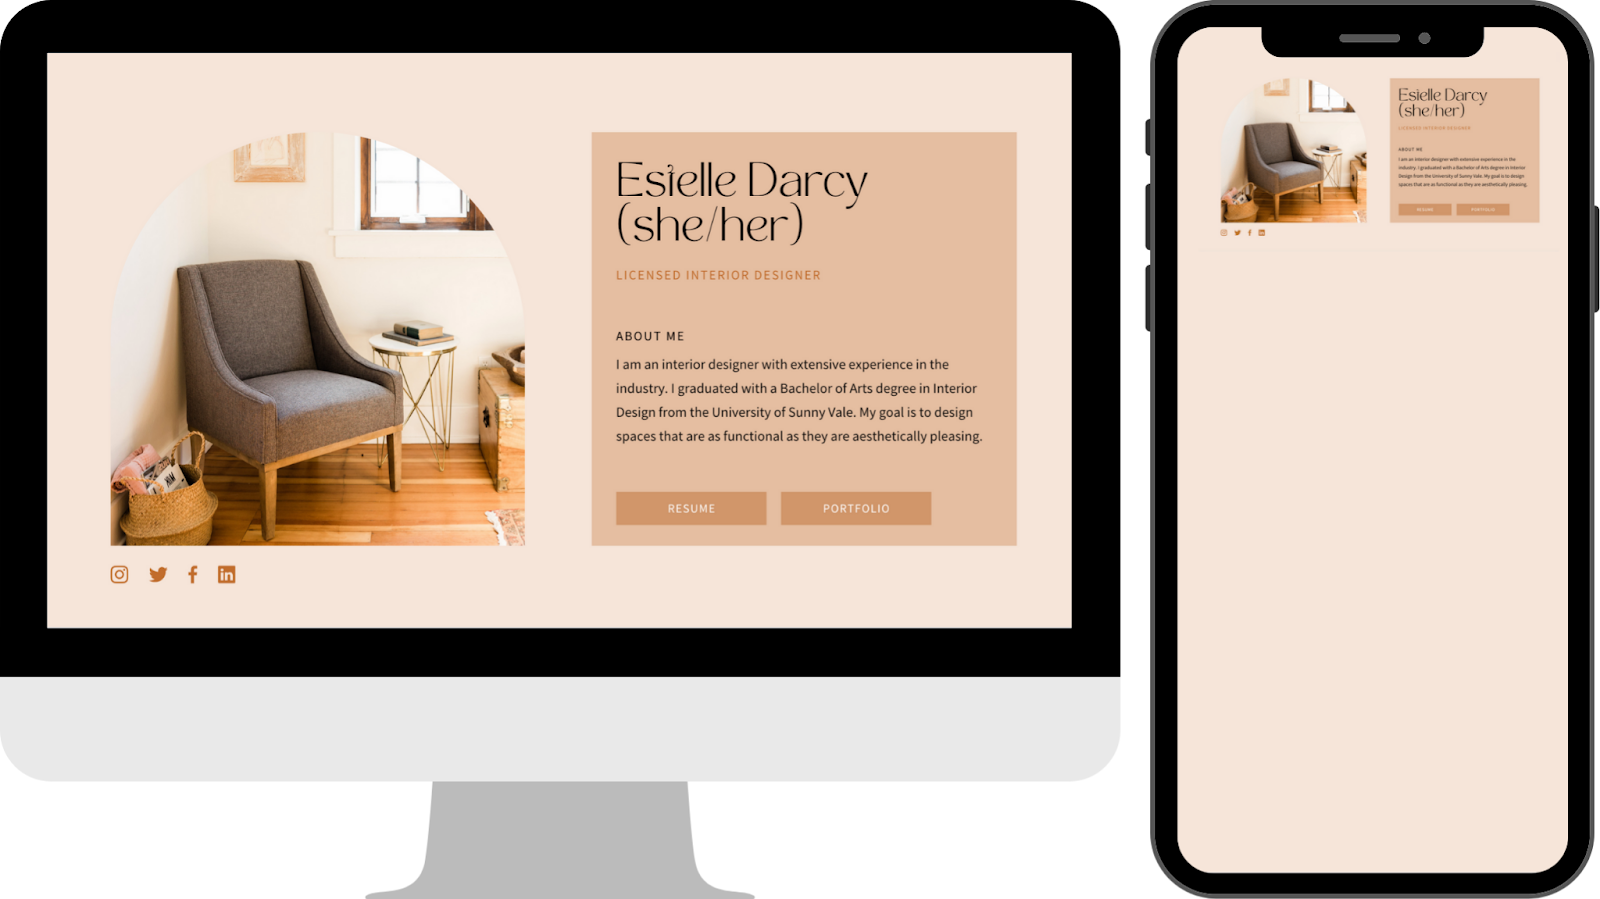 A beautiful Canva template featuring a sofa, coffee table with a book on it and wooden flooring in a well-lit apartment. The template is states "Estelle Darcy" with resume and portfolio buttons. They are illustrated on a desktop and mobile device to show the difference in scaling, with the mobile version scaled to look too small that it's no longer legible.